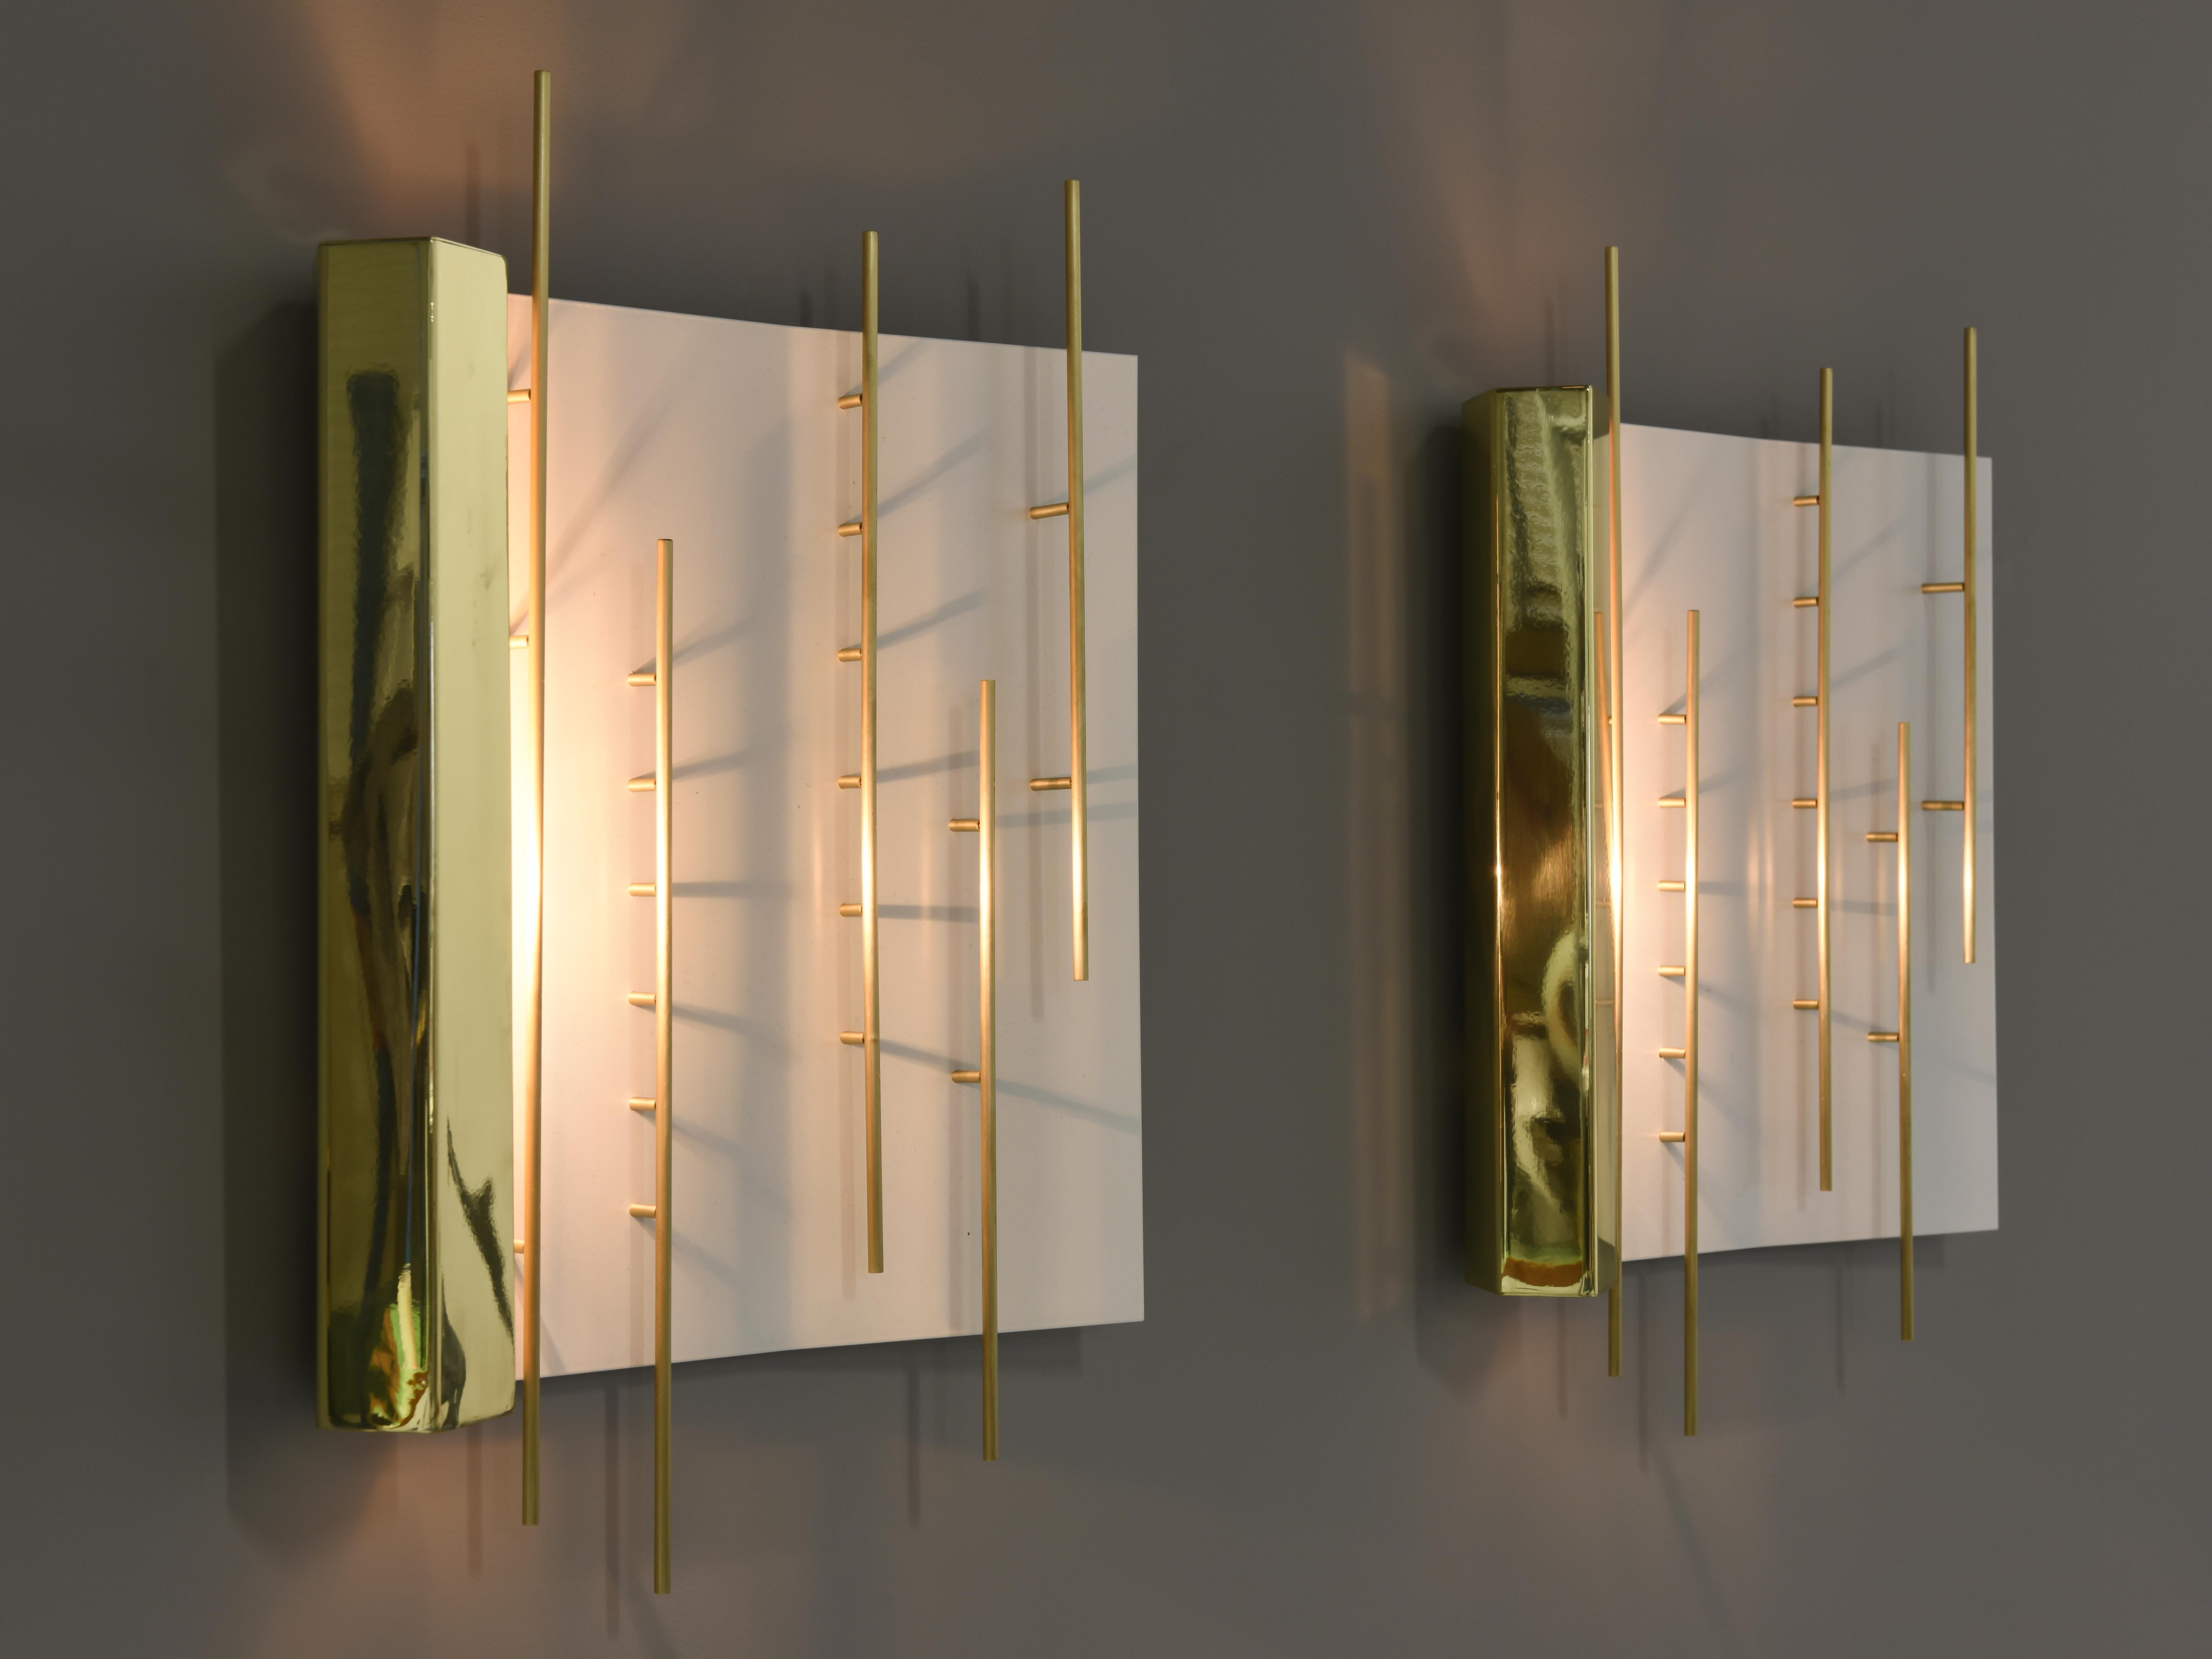 Elegant square wall sconces by the famous designer and architect from Italy.
Very graphic lamps in brass and lacquered metal. The light hidden on the left side creates play of light on the lamp and wall.

Signed with applied brass 